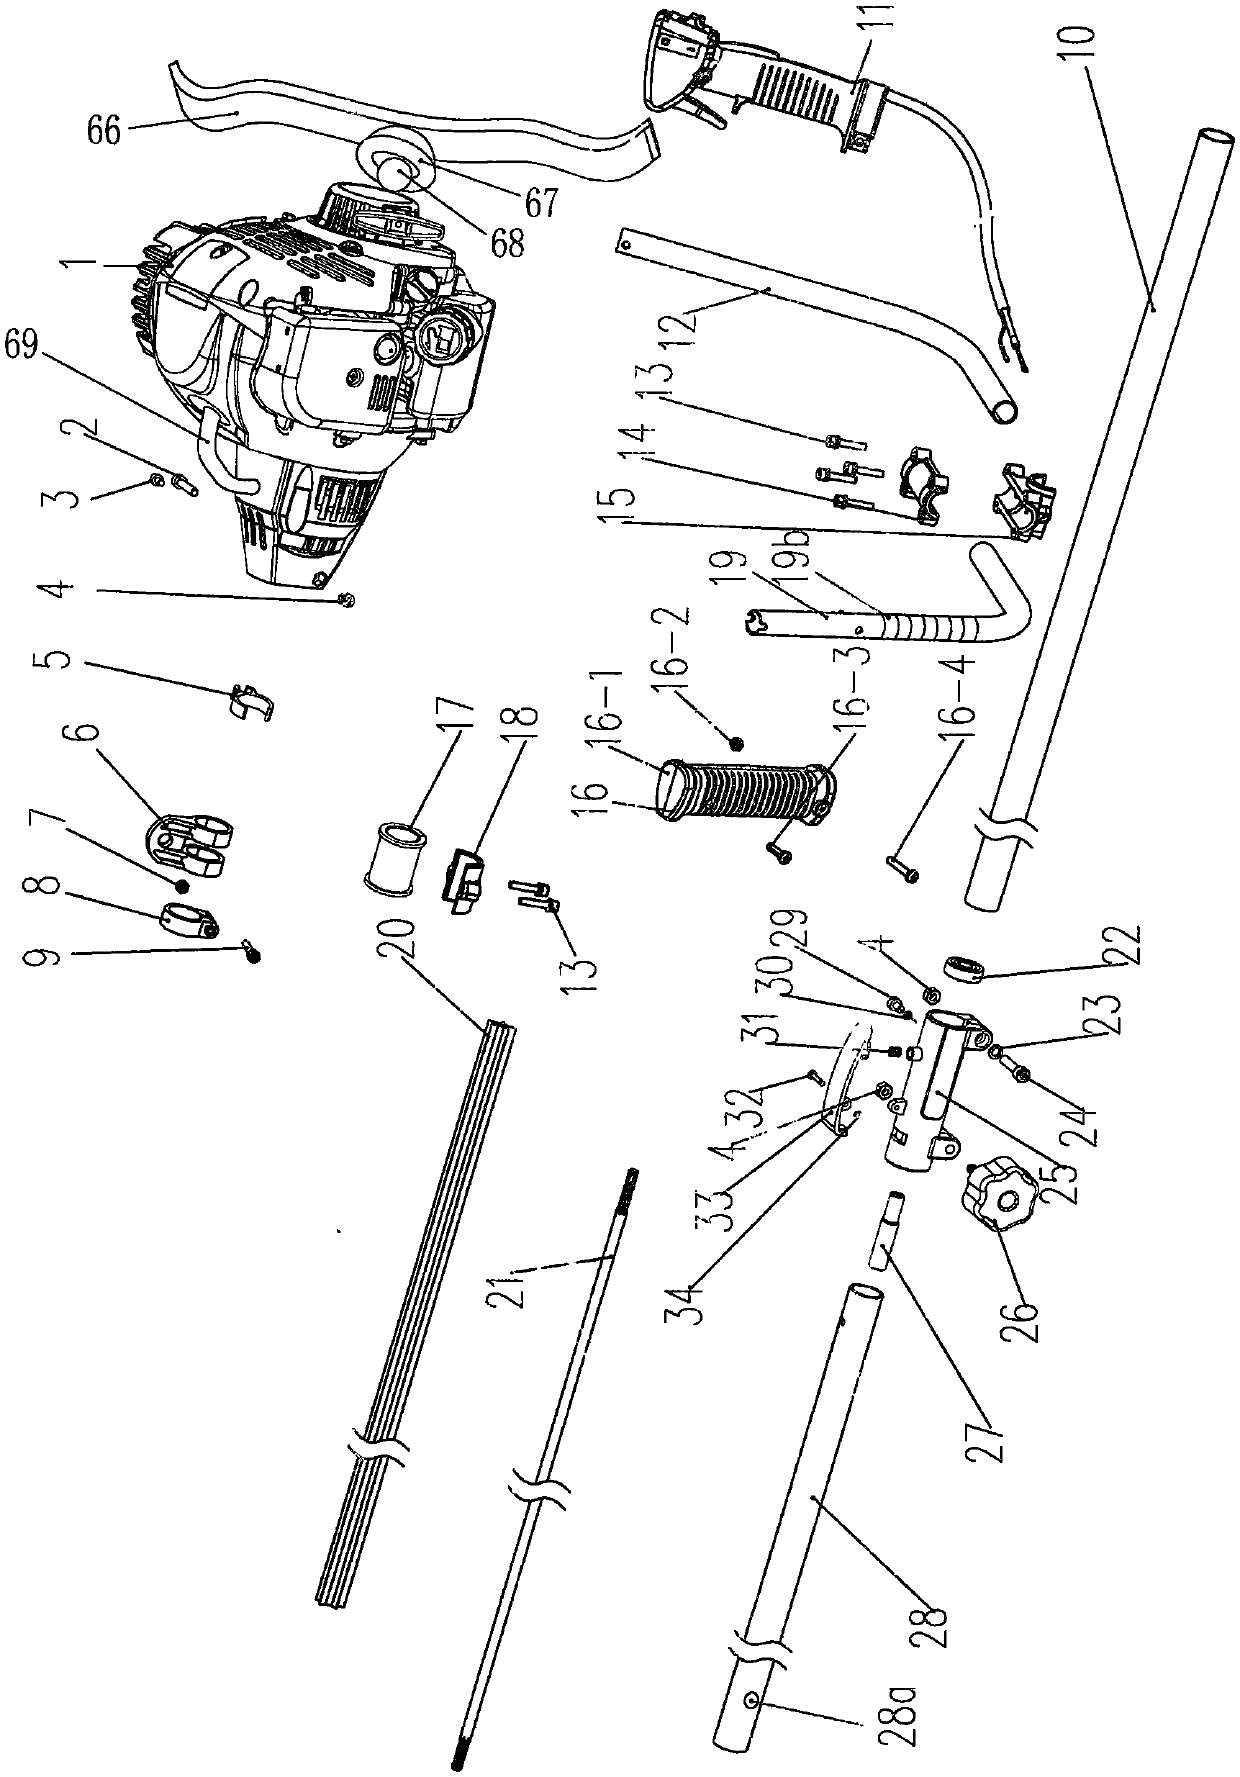 Brush cutter with single-cylinder half-balance and parabola wing-shaped blade gasoline engine